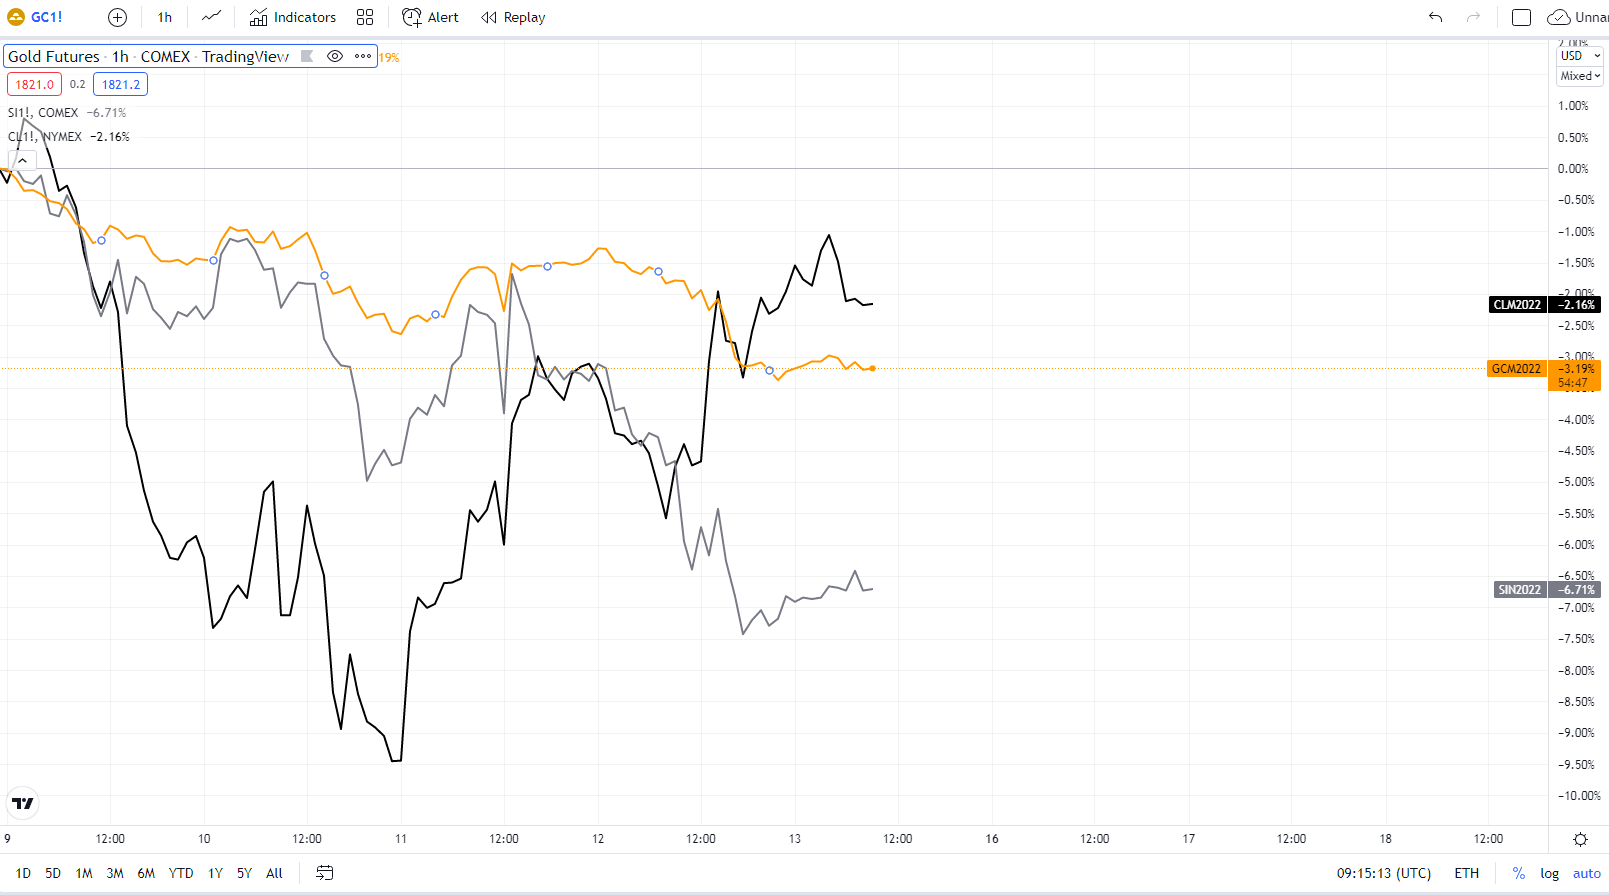 Weekly development of Gold (GC), Silver (SI) and Crude oil (CL) in %. Source: tradingview.com